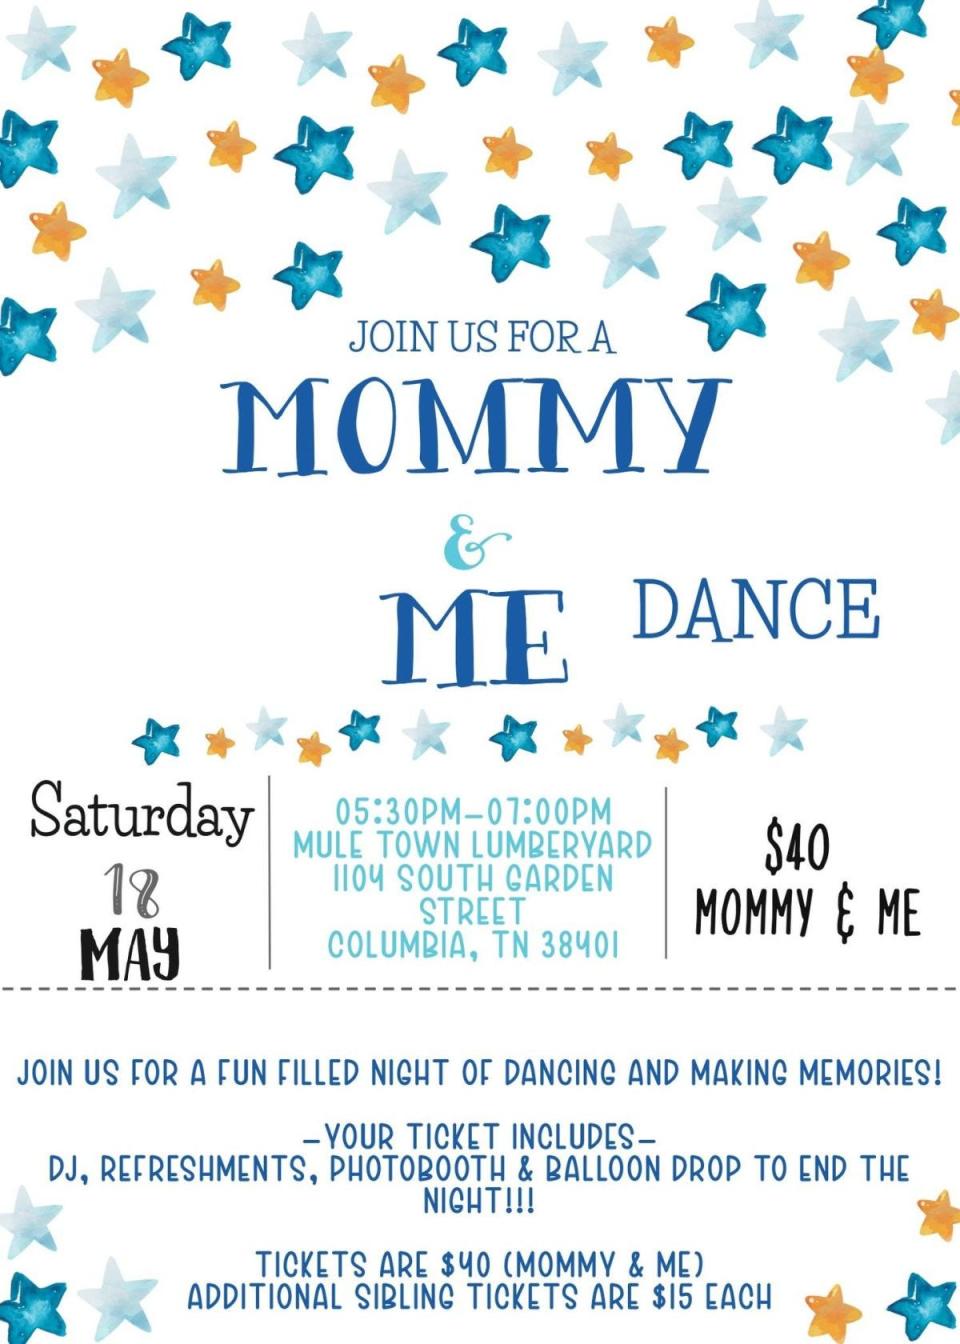 Mule Town Lumber Yard will host a Mommy & Me Dance this Saturday starting at 5:30 p.m.